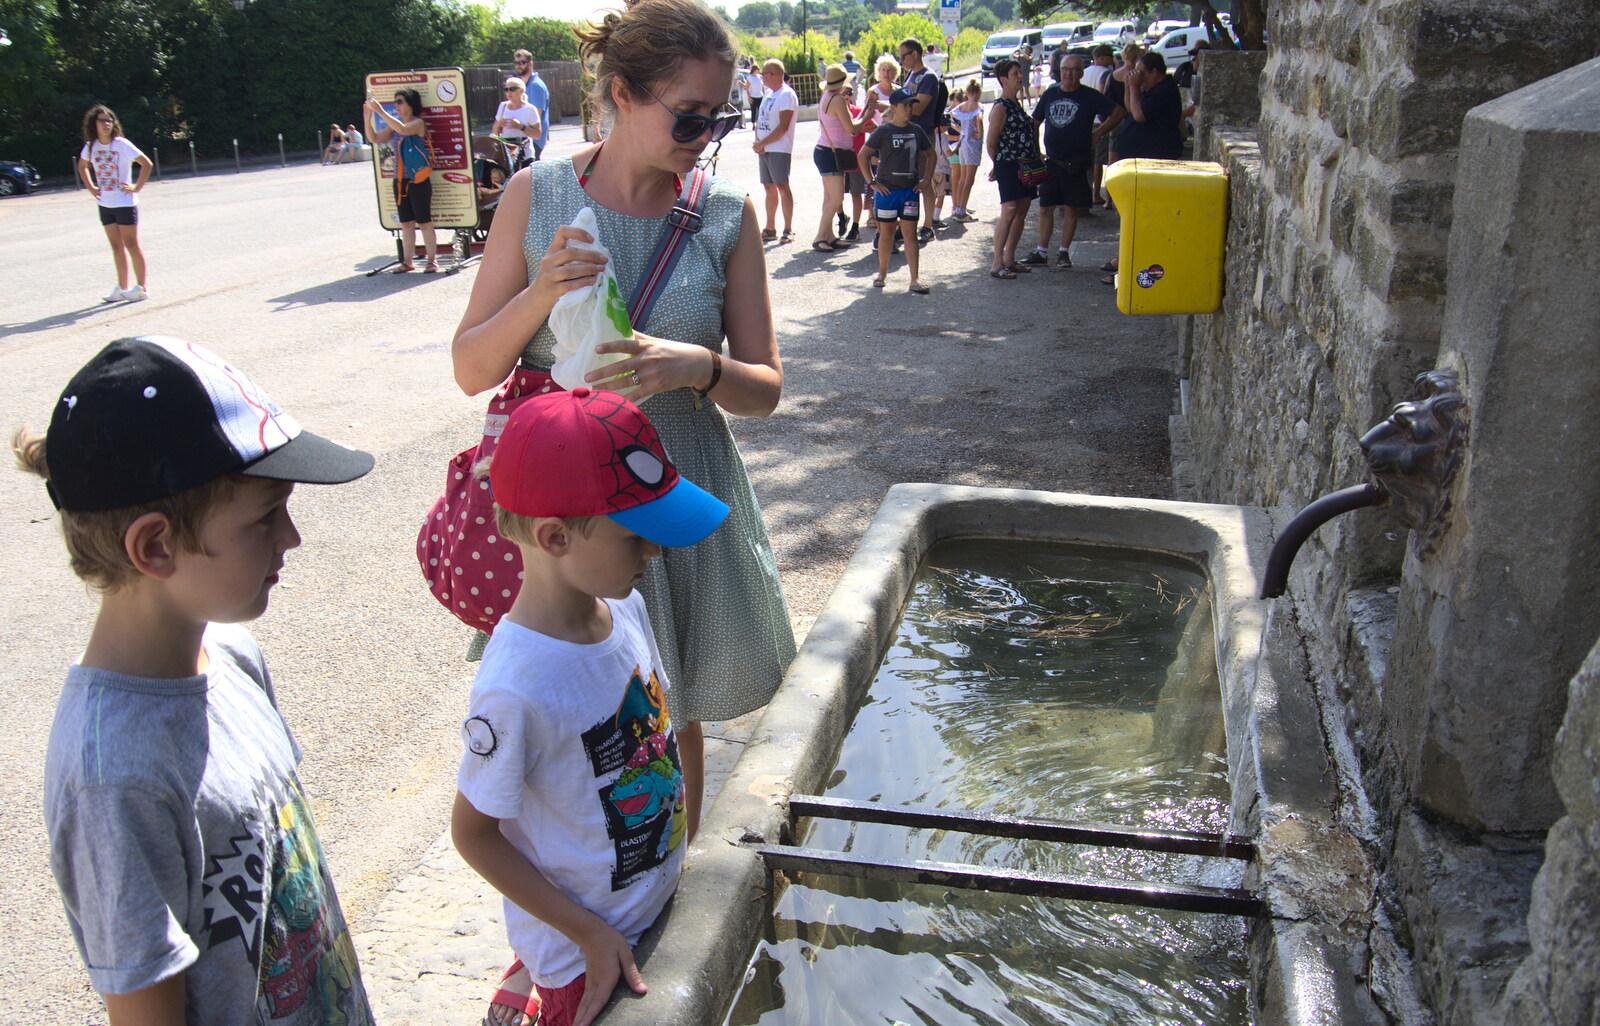 We fill up water bottles from A Trip to Carcassonne, Aude, France - 8th August 2018